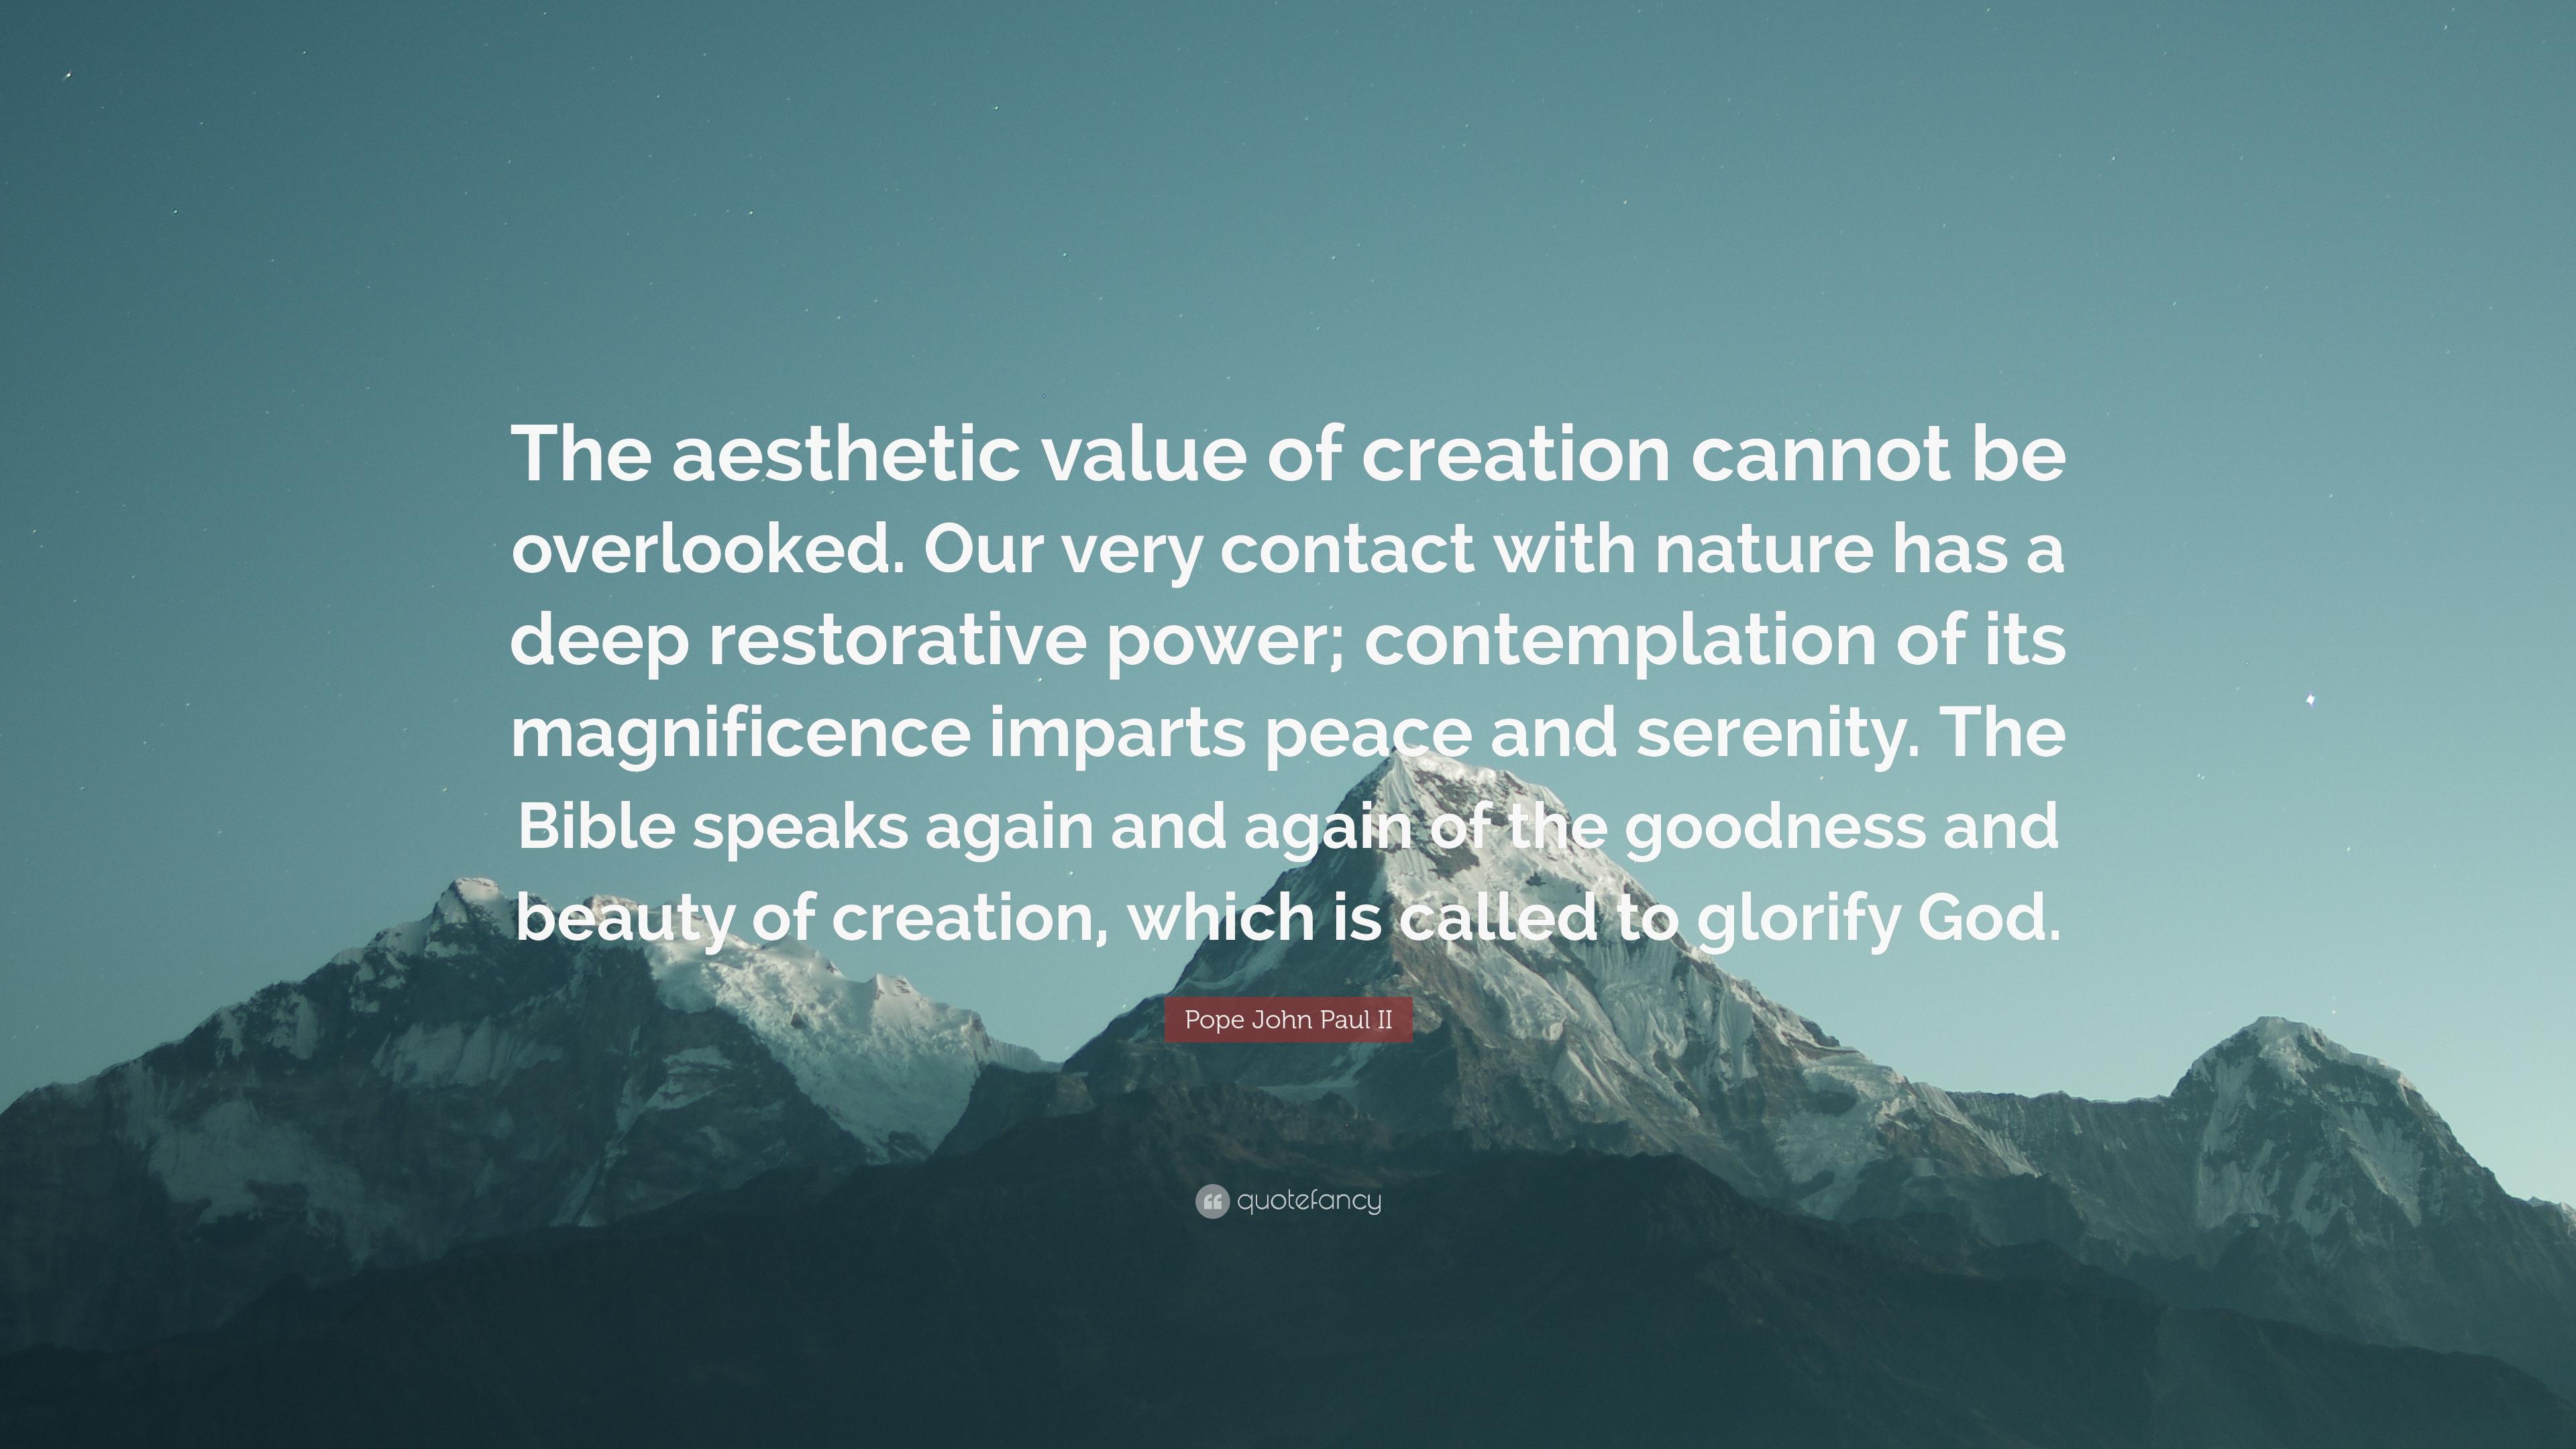 Pope John Paul II Quote: “The aesthetic value of creation cannot be